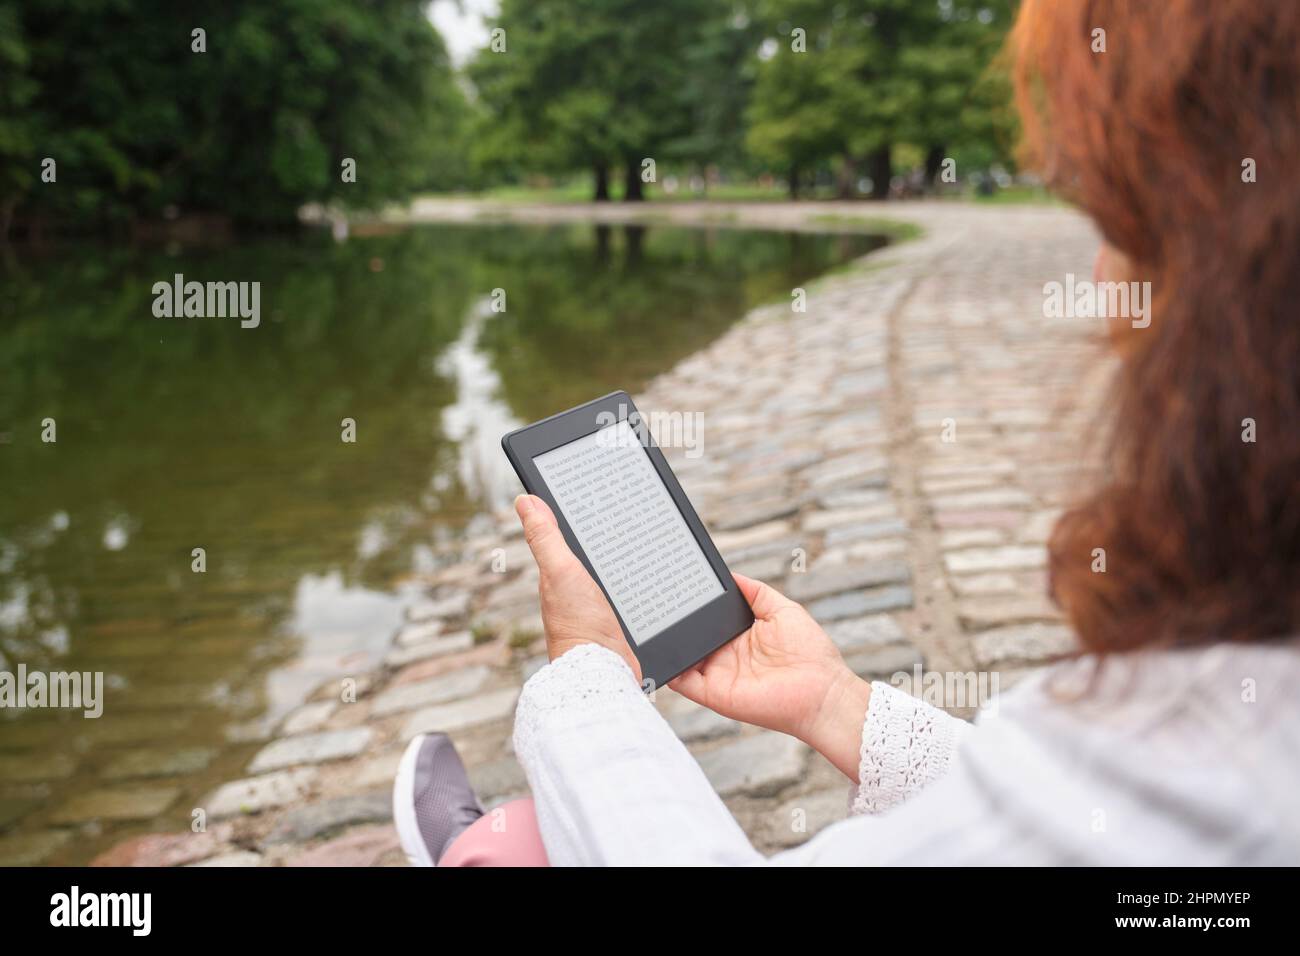 Unrecognizable mature woman reading an ebook on an electronic reader sitting in a park. Concepts: technology and reading. Image with copy space Stock Photo